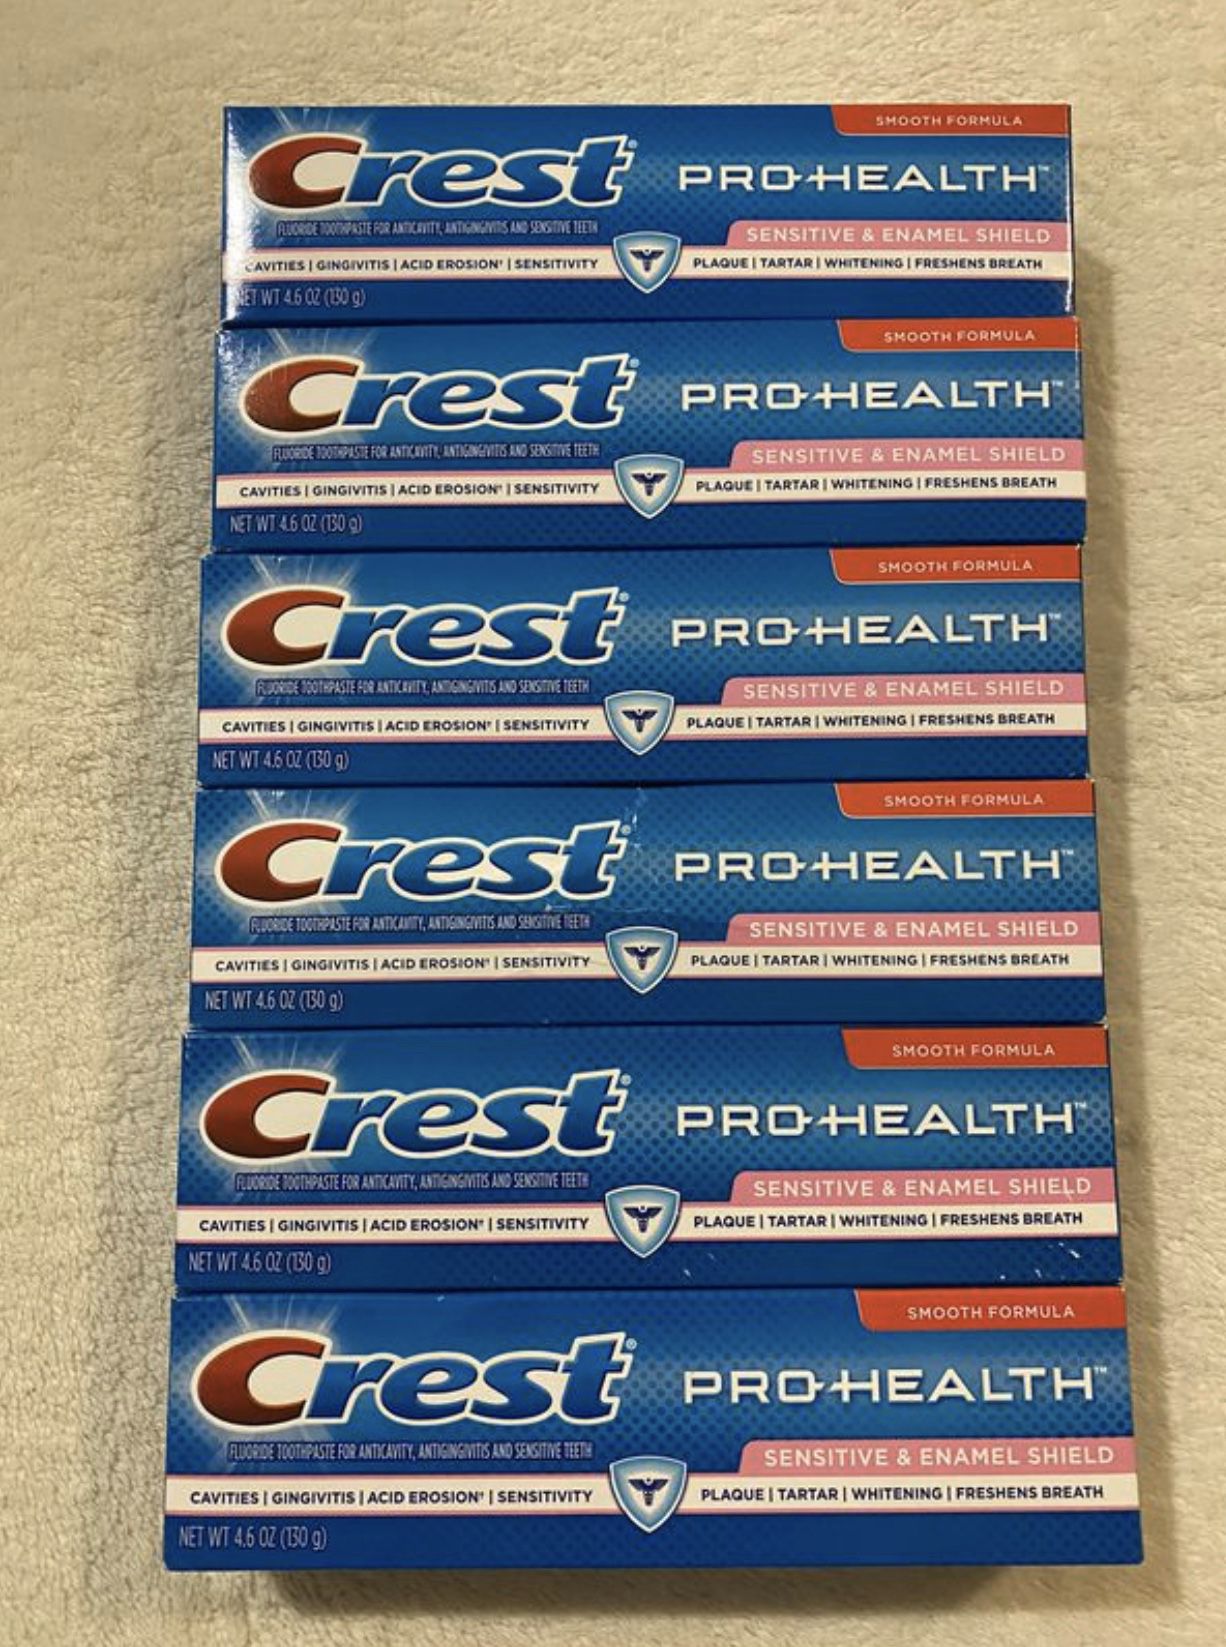 Crest Pro-Health Sensitive Toothpaste 4.6oz $1.50 each (Pick Up Only)